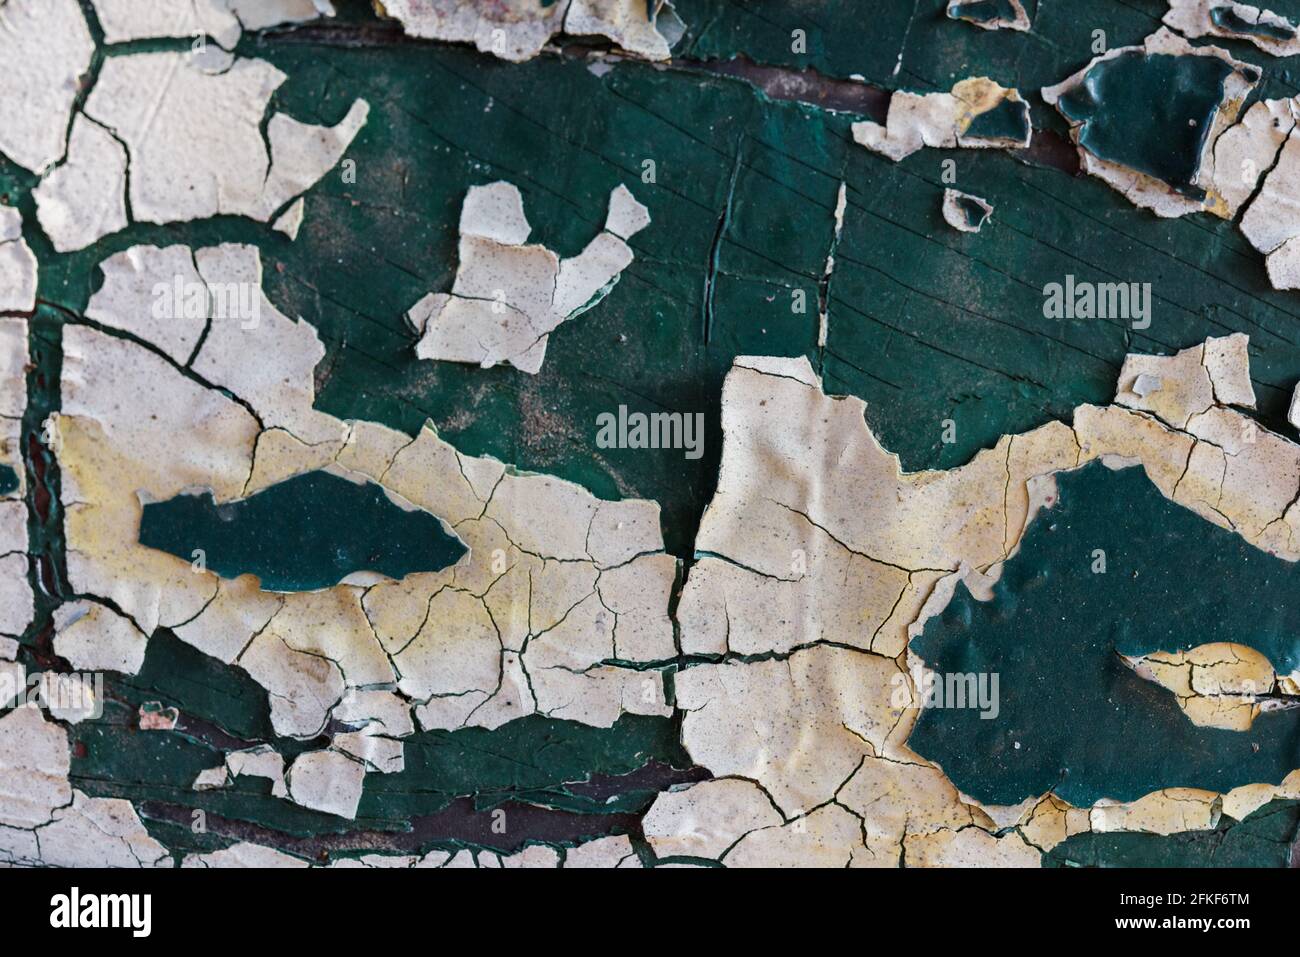 Cracked, peeling and dirty surfaces Stock Photo